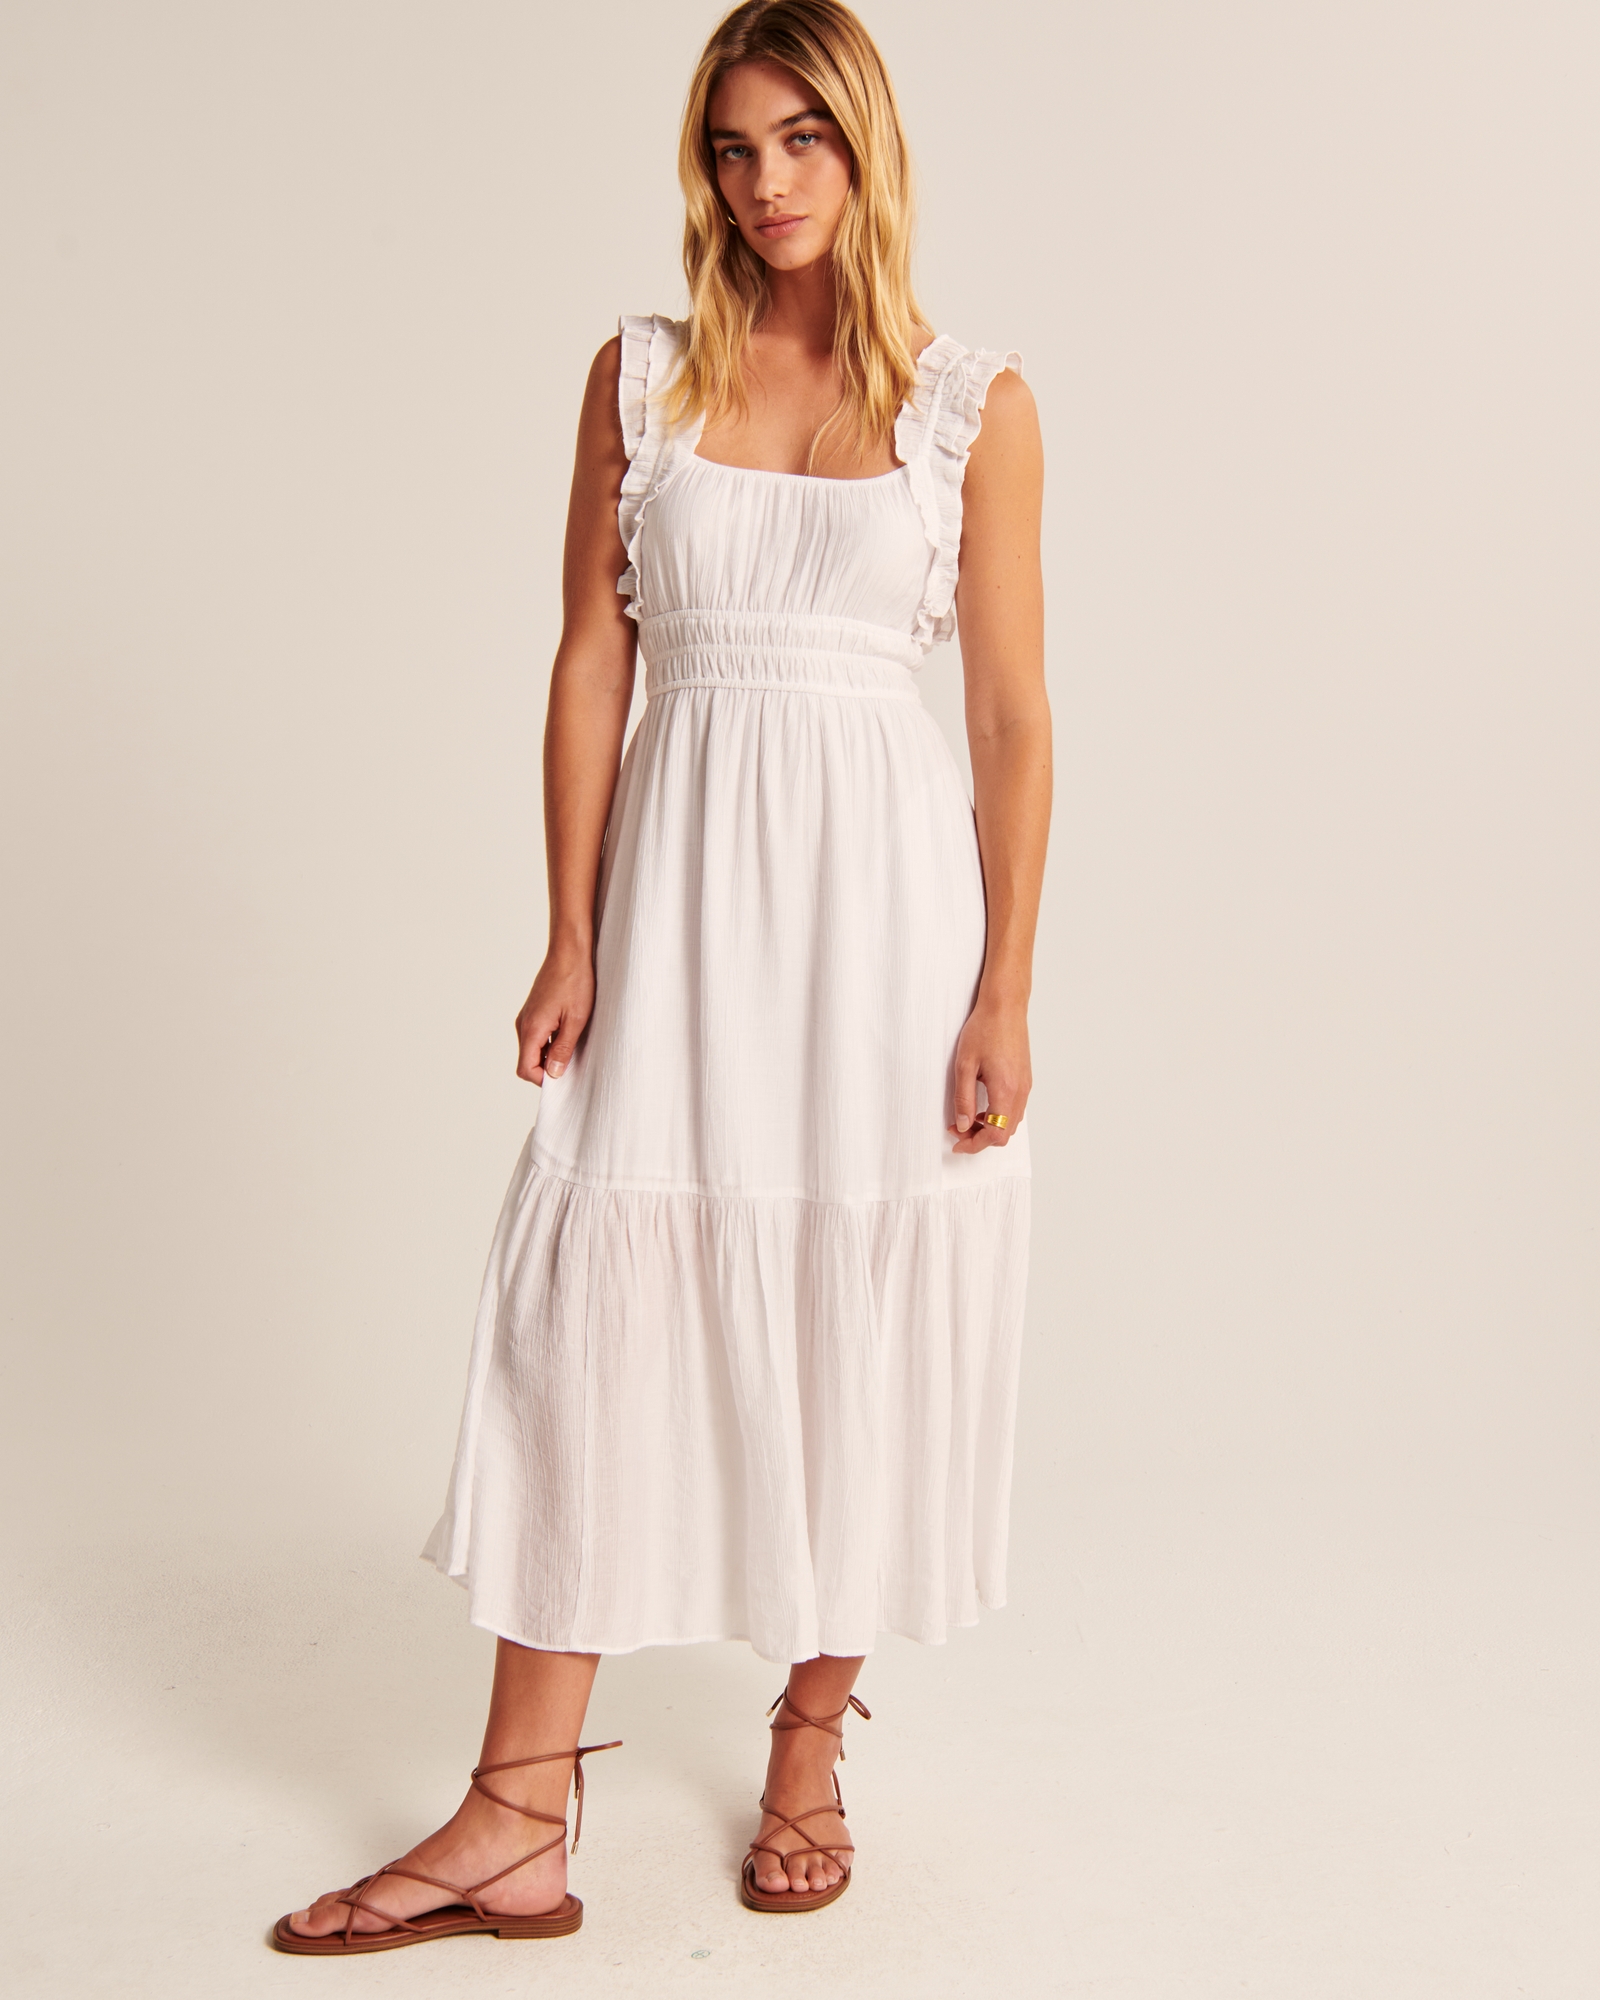 Abercrombie & Fitch Smocked Bodice Easy Maxi Dress, 58% OFF